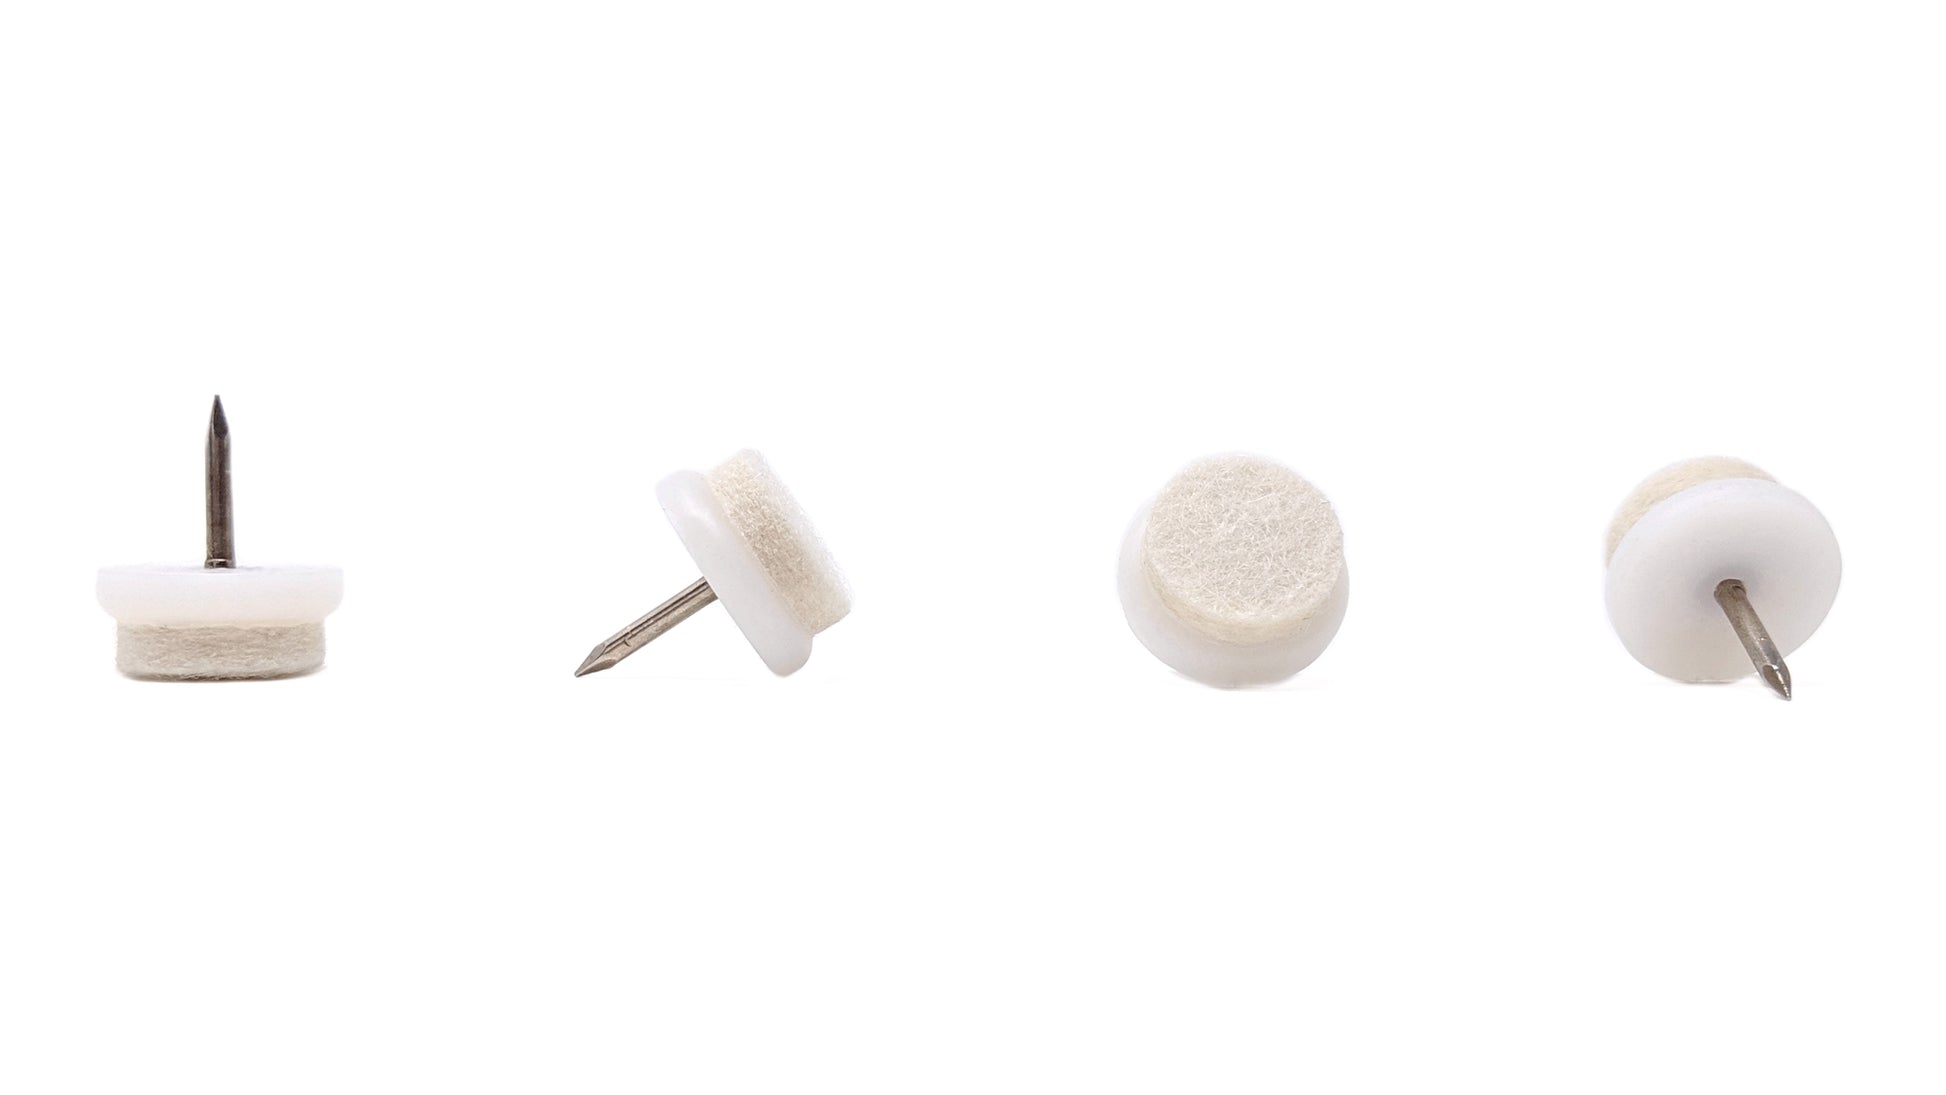 21mm Nail in Stiffened Wool Felt Glides / White - Made in Germany - Keay Vital Parts